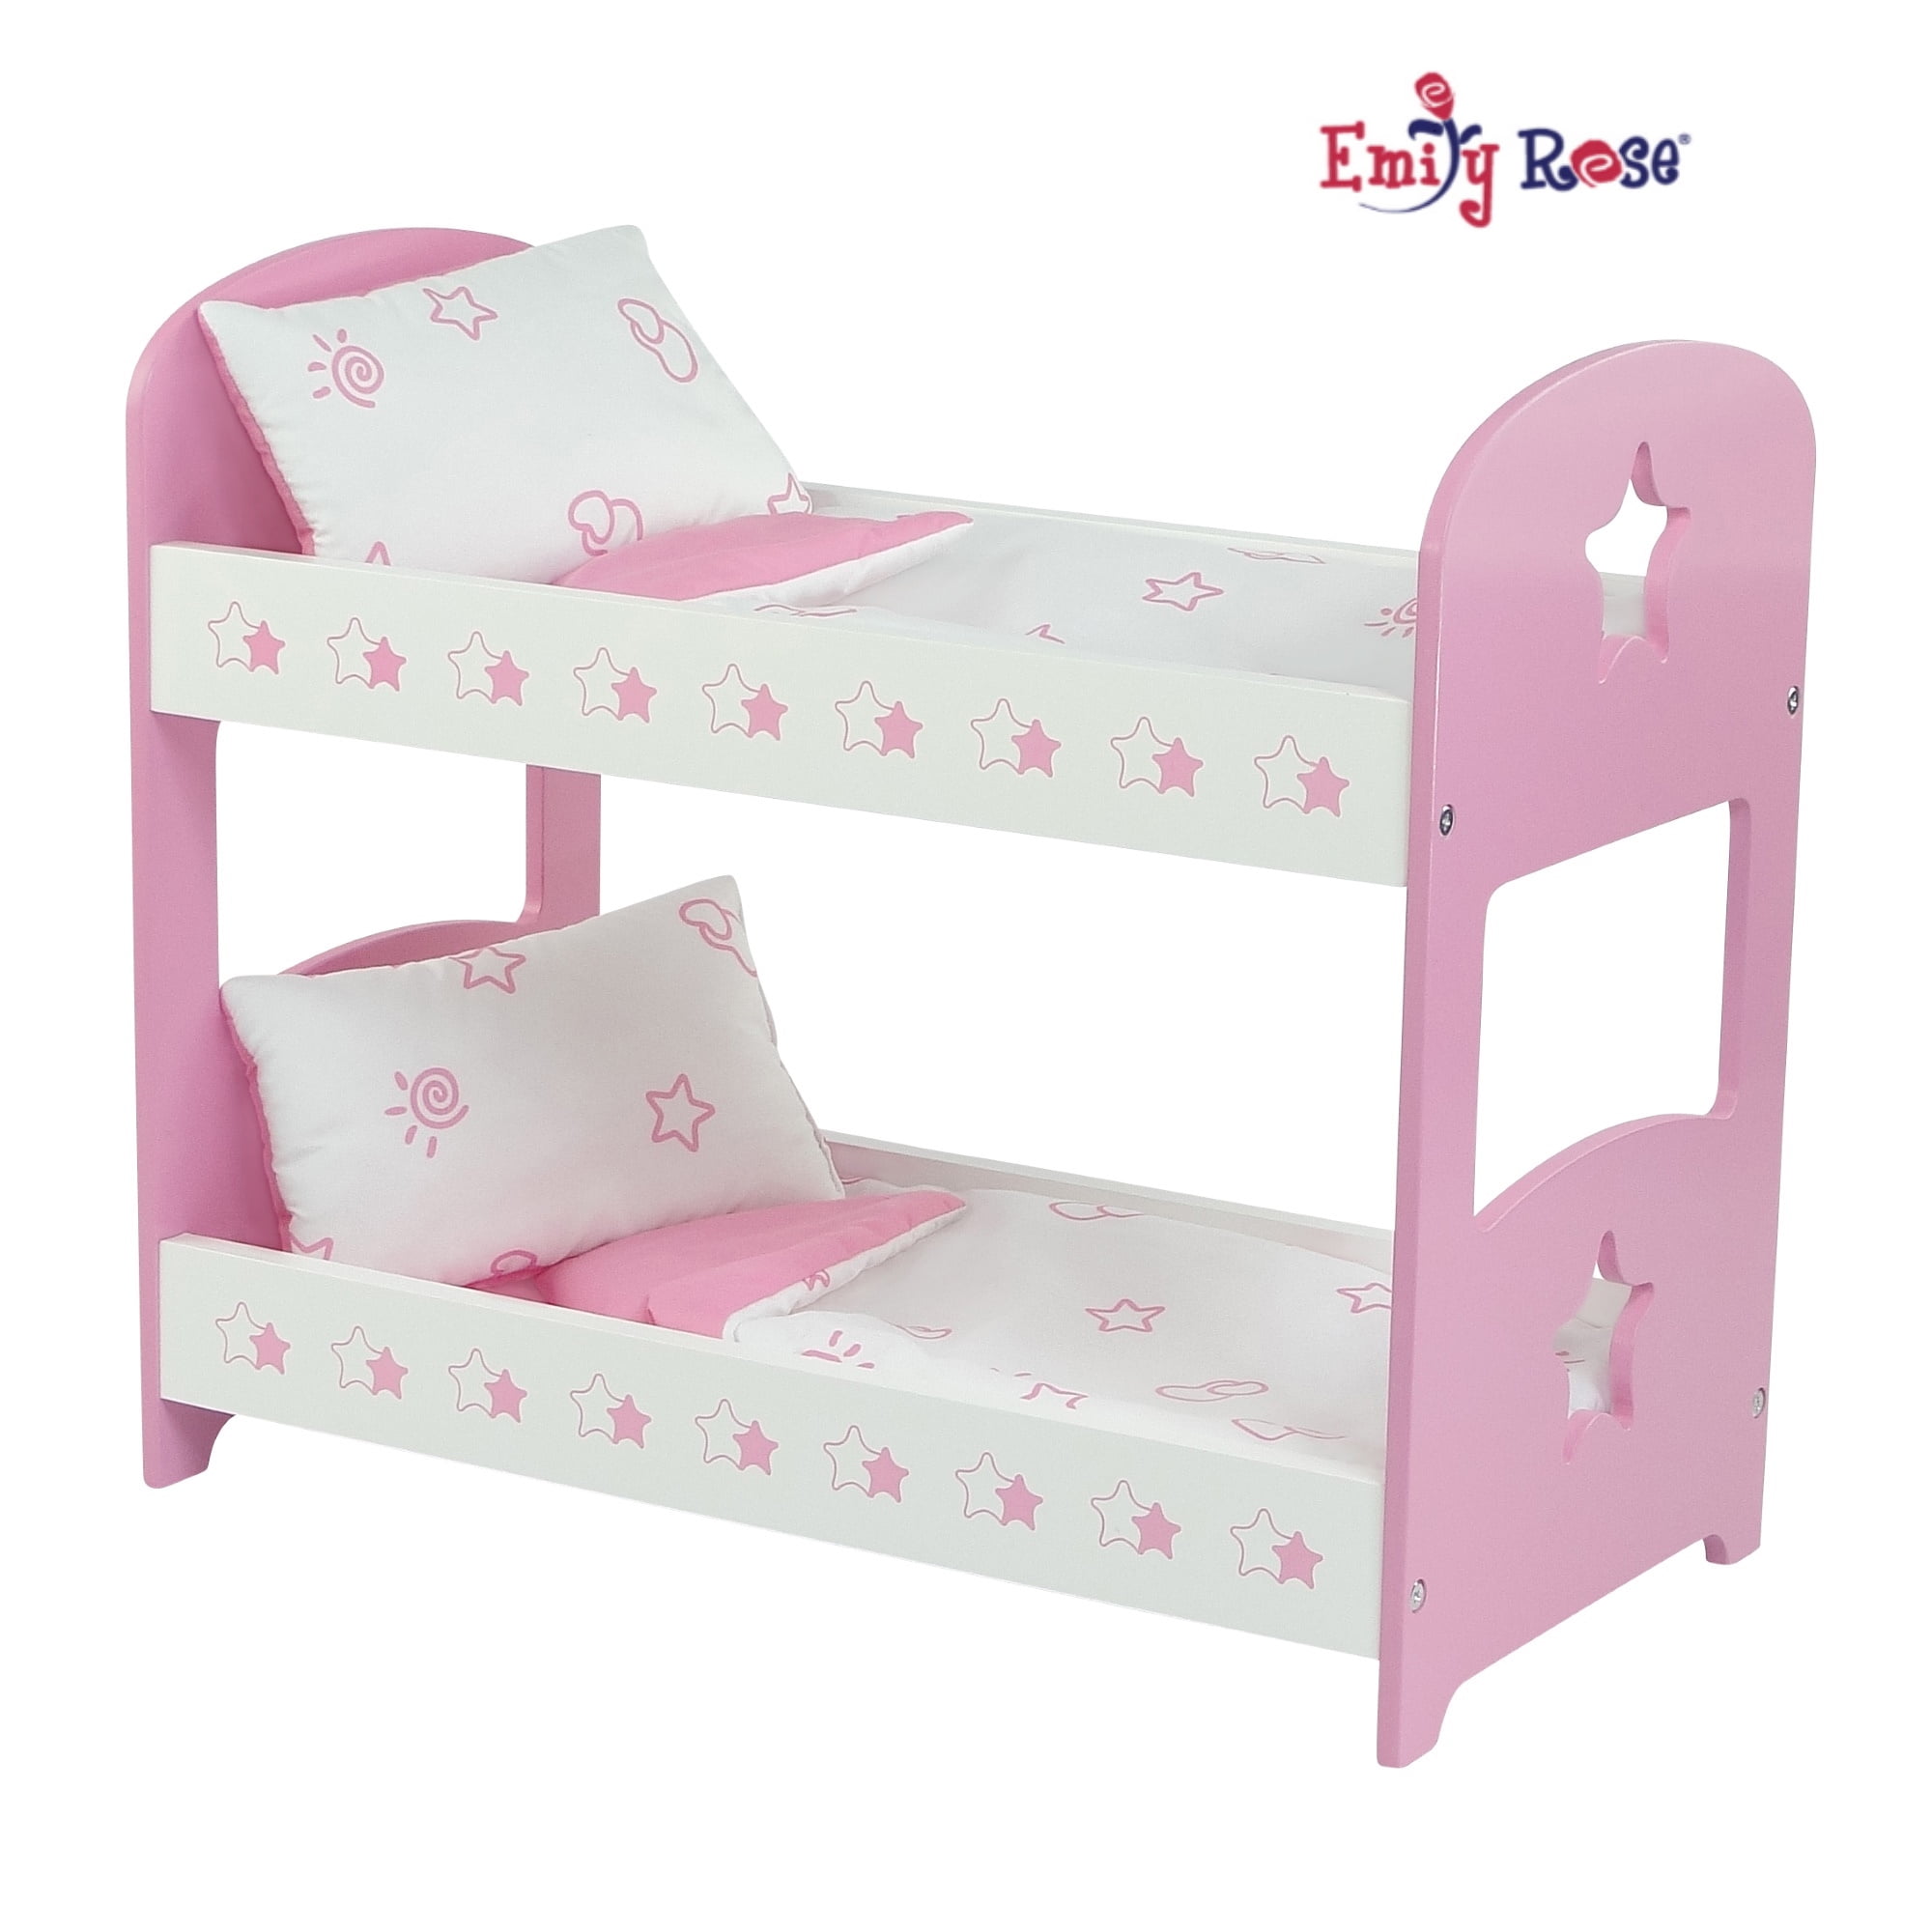 18 Inch Doll Bunk Bed Furniture, 18 Doll Bunk Bed